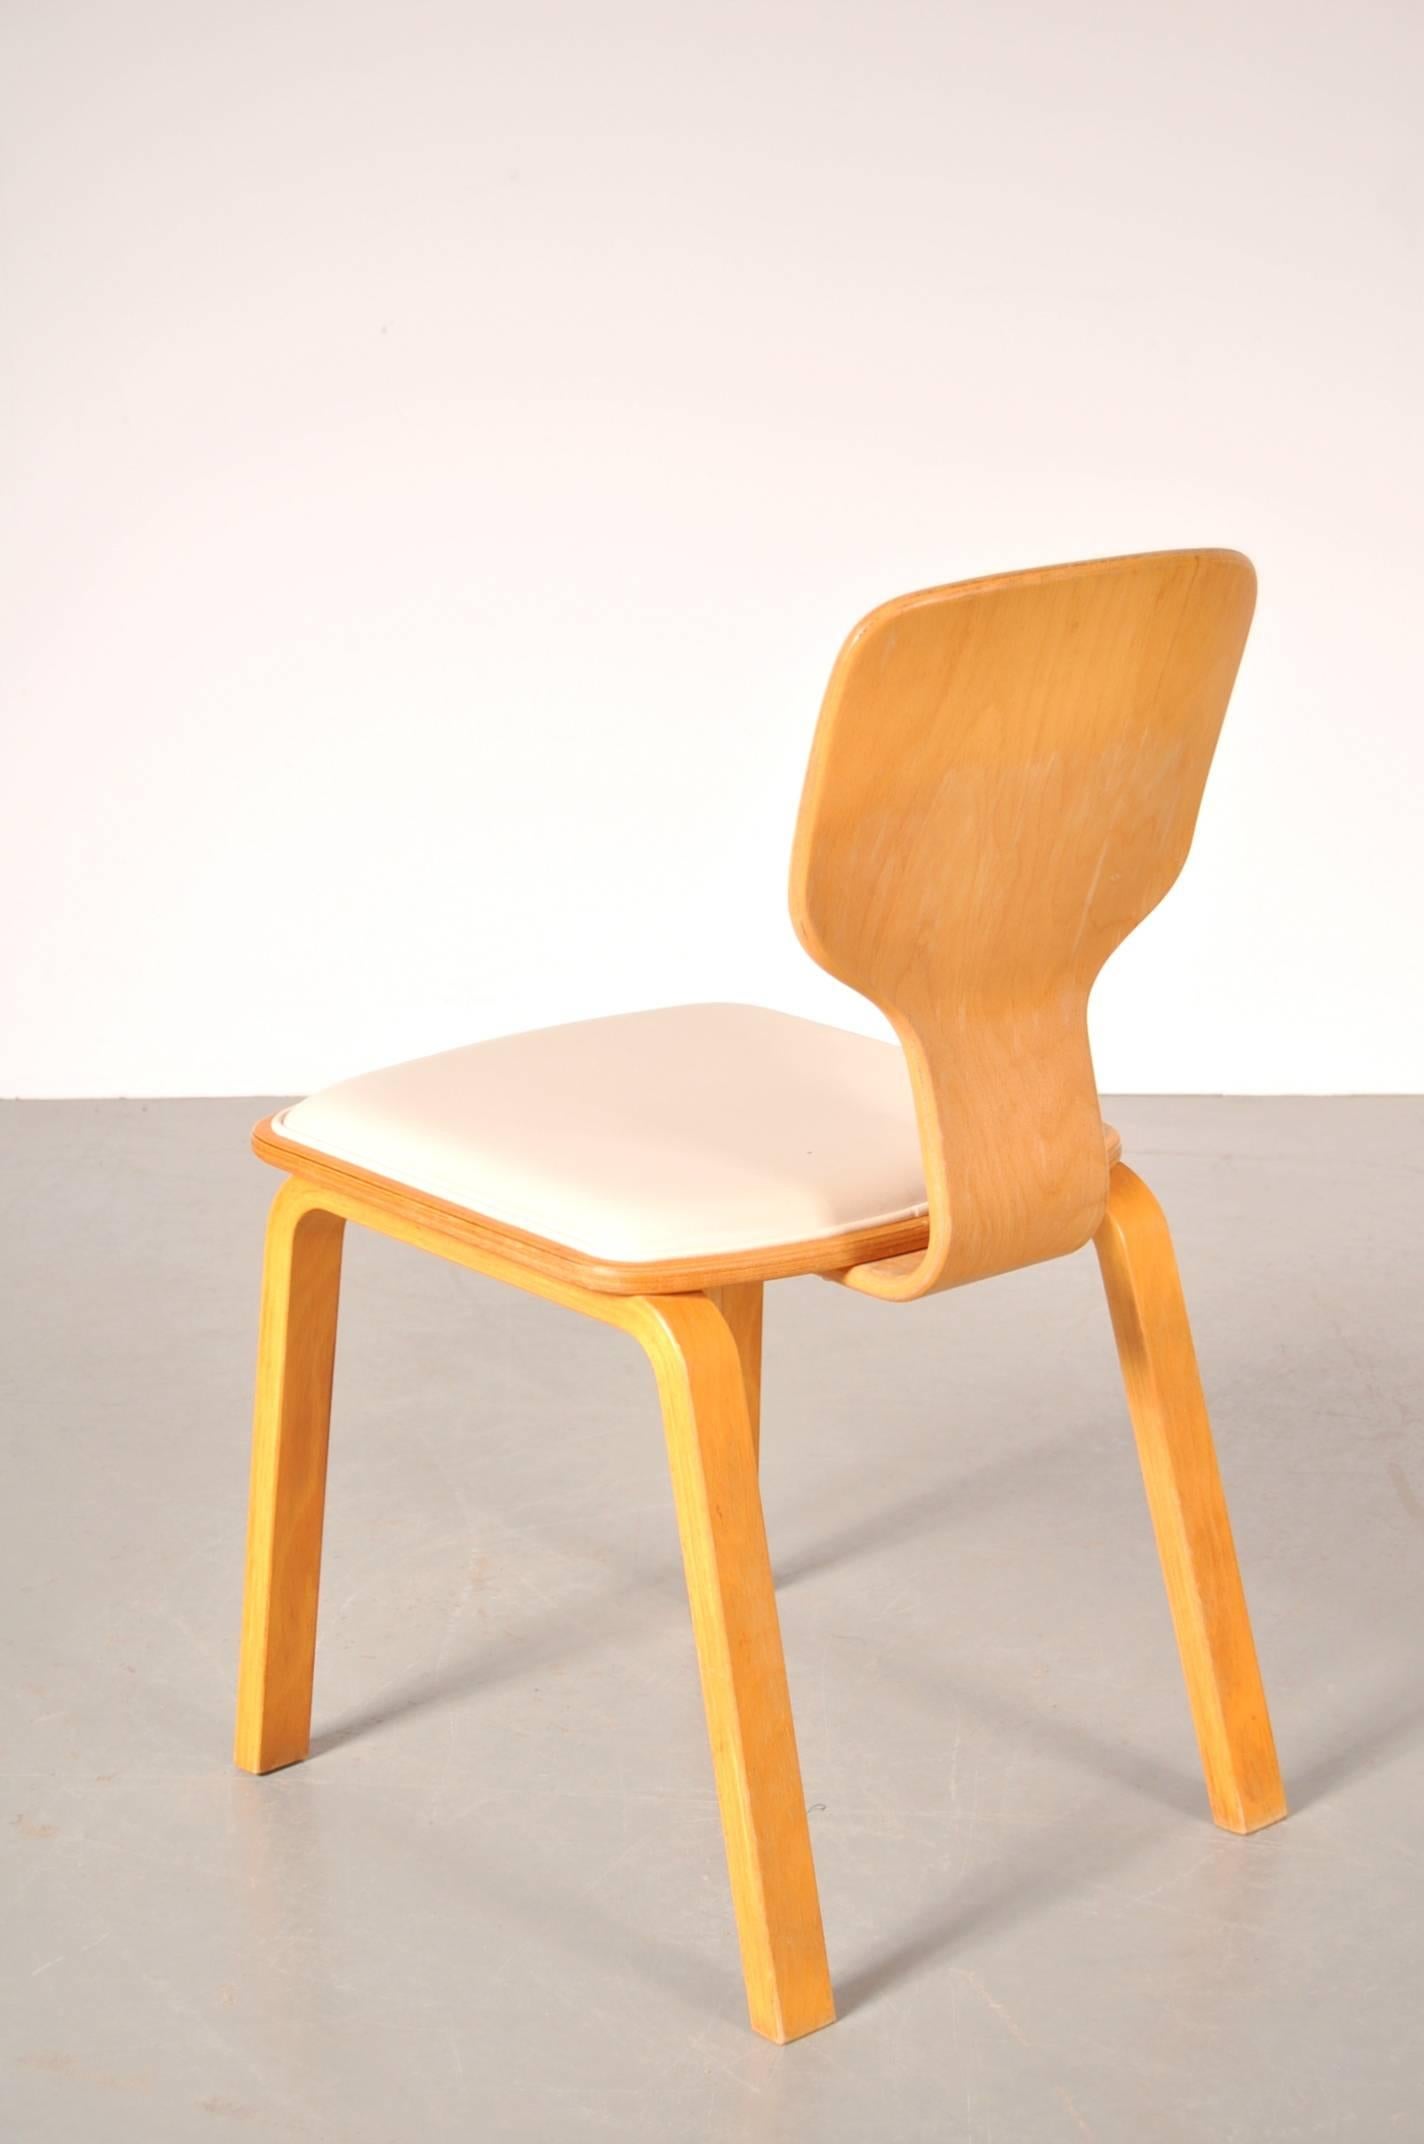 Beech Set of Four Dining Chairs Model T-0635B by Katsuo Matsumura for Tendo, Japan